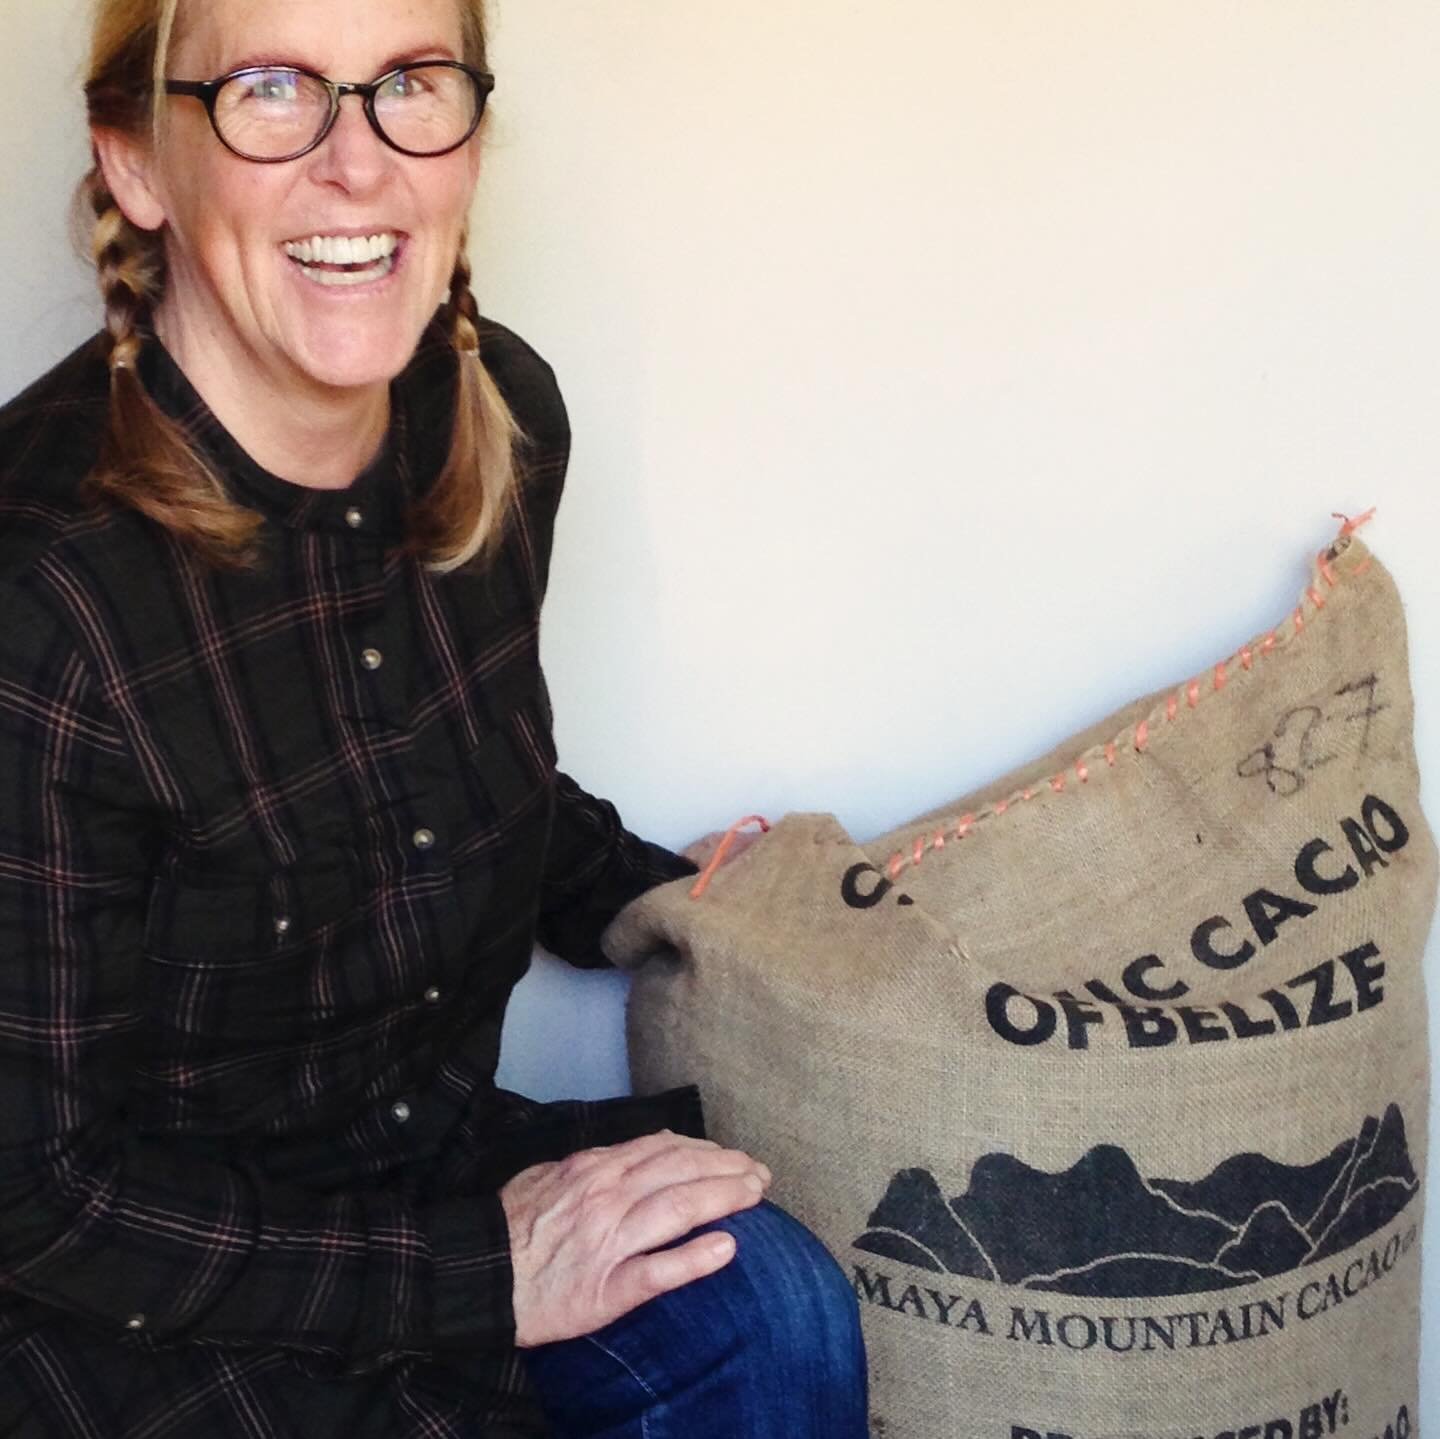 FIRST LOVE = FIRST FULL BAG BUY

A craft chocolate maker 🫘never🫘 forgets the heart-pounding thrill of our first full bag of cacao. So many beans! So many ideas! So many bars we&rsquo;ll be able to make! Soooo much roasting to do! 🤣

Mine was Maya 